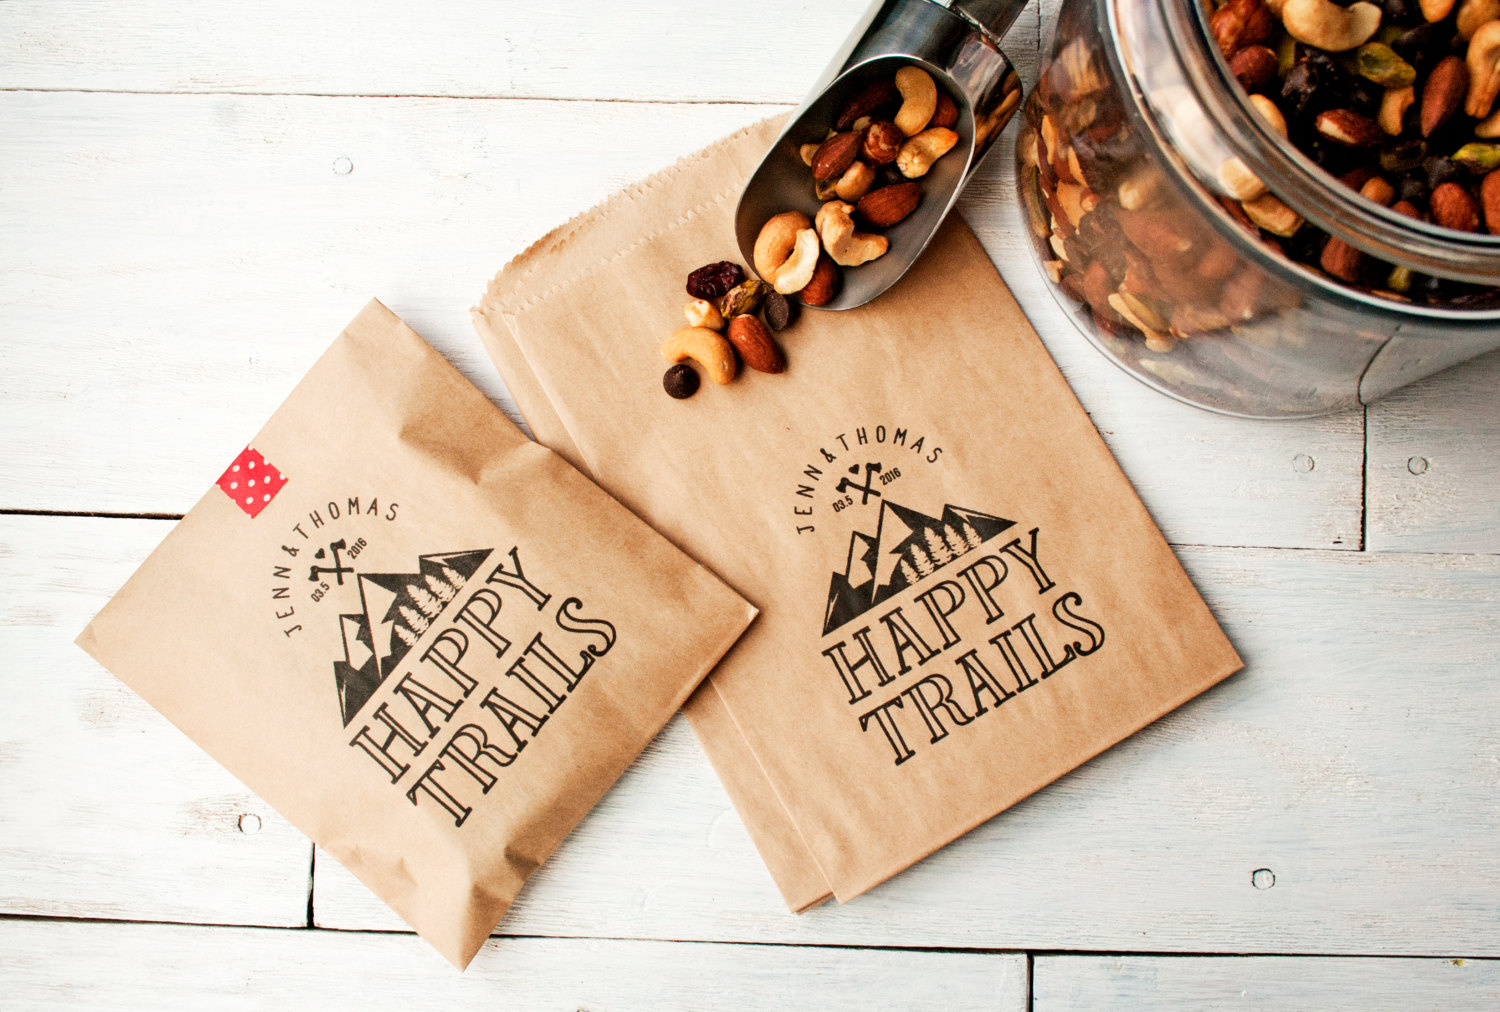 happy trails mountain wedding favor bags